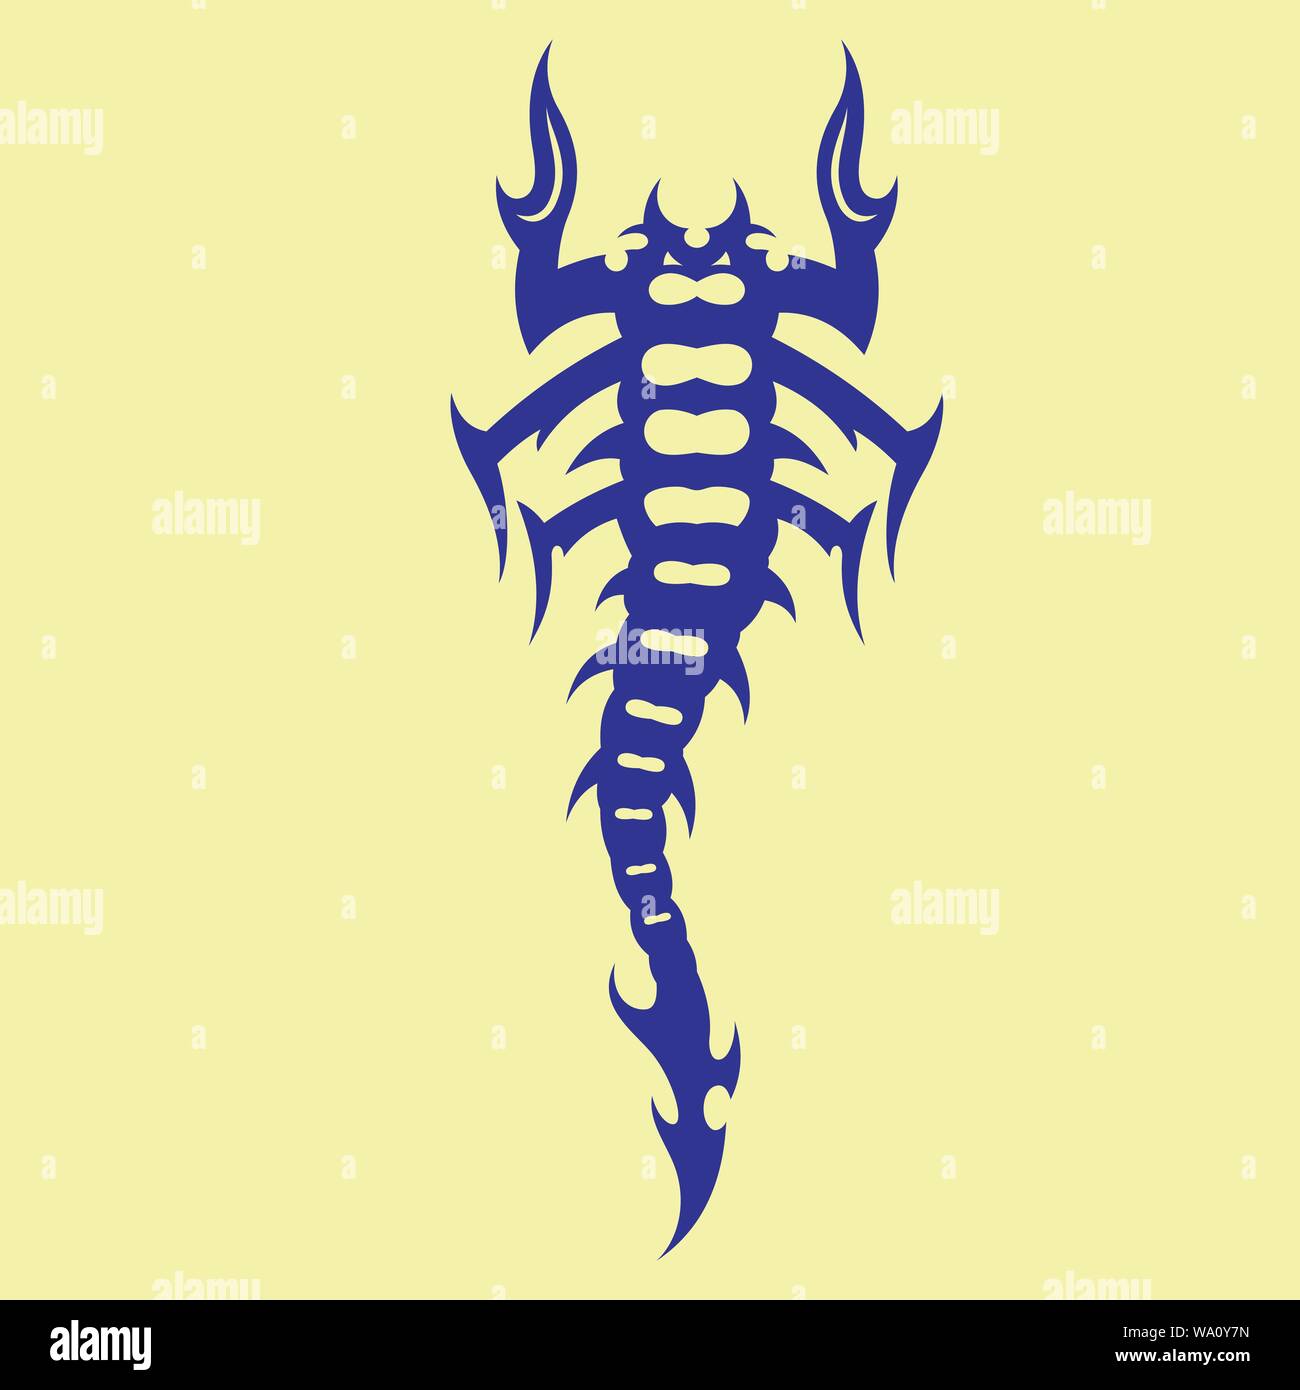 Scorpion tail drawing Stock Vector Images - Page 3 - Alamy